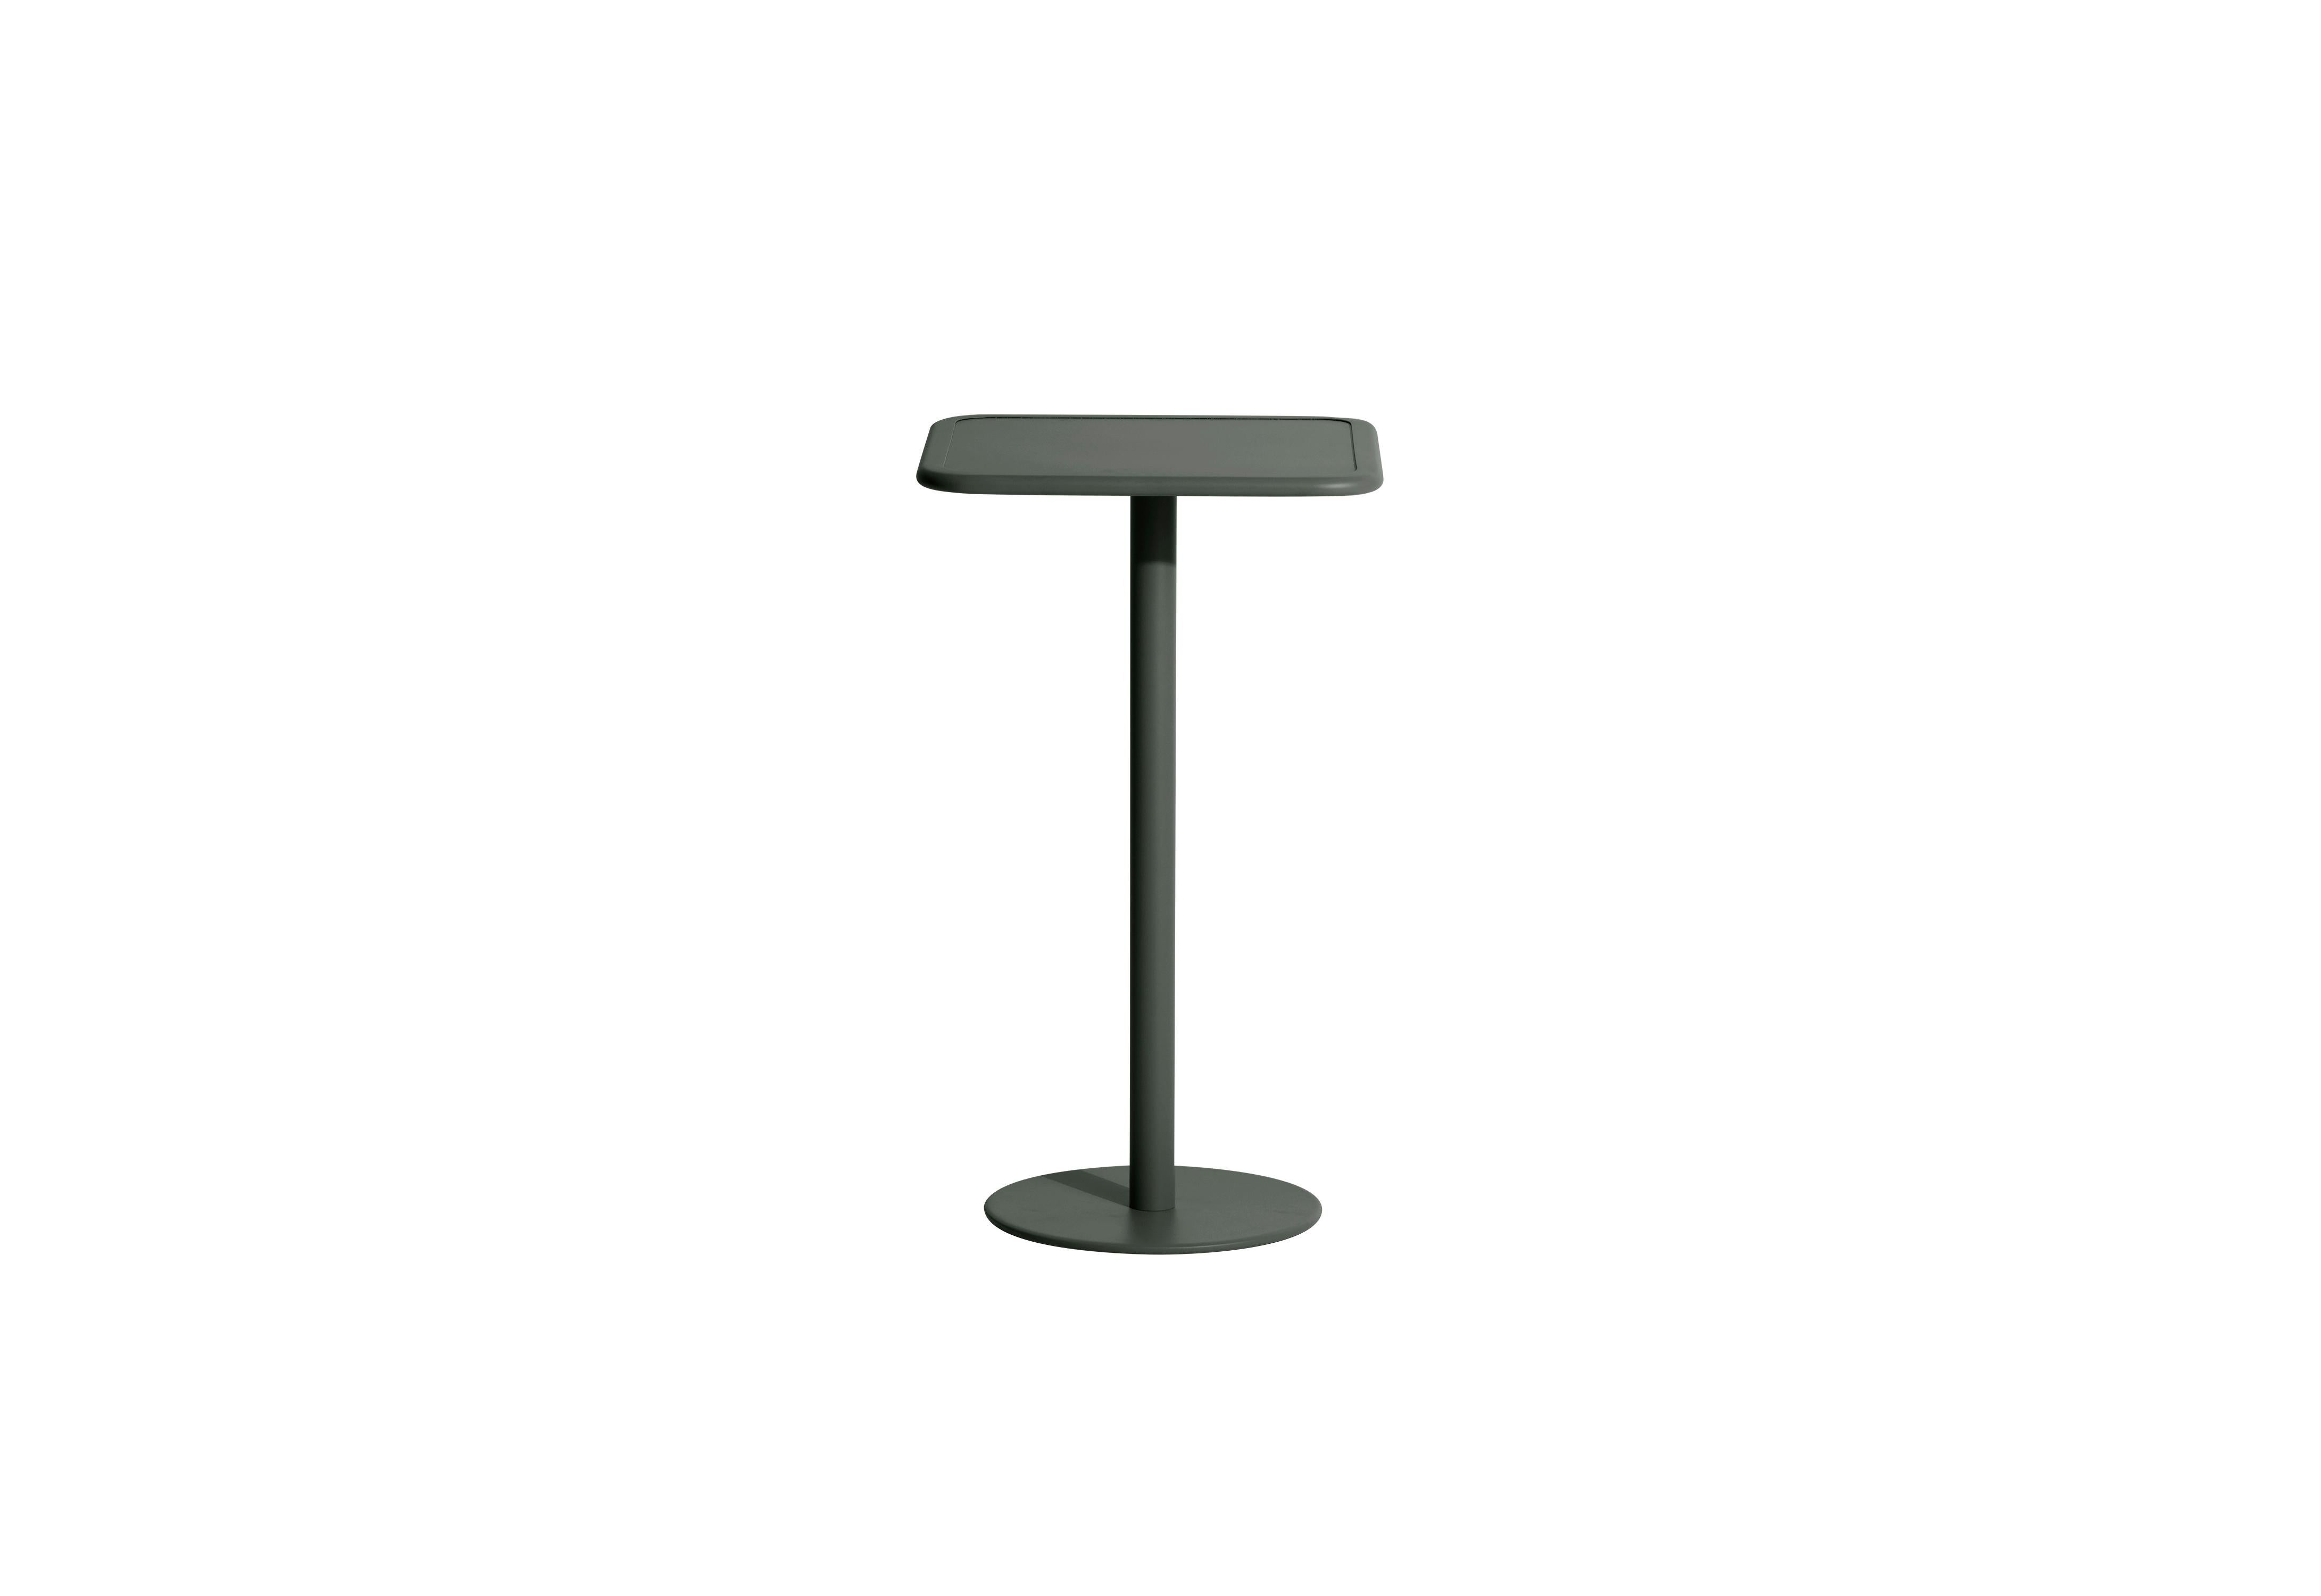 Petite Friture Week-End Square High Table in Glass Green Aluminium by Studio BrichetZiegler, 2017

The week-end collection is a full range of outdoor furniture, in aluminium grained epoxy paint, matt finish, that includes 18 functions and 8